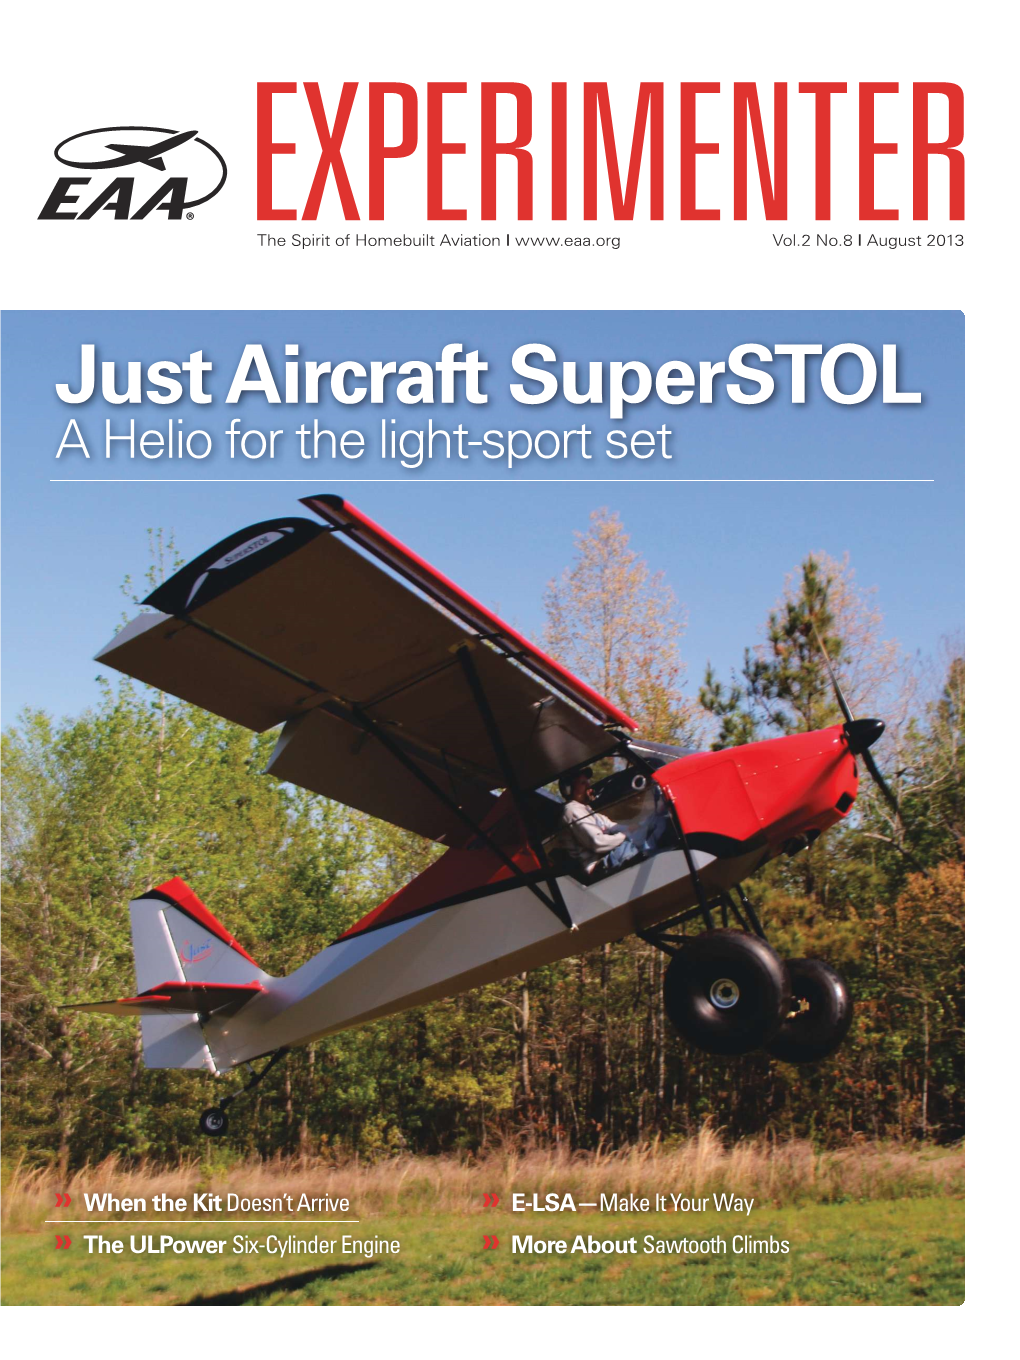 Just Aircraft Superstol a Helio for the Light-Sport Set